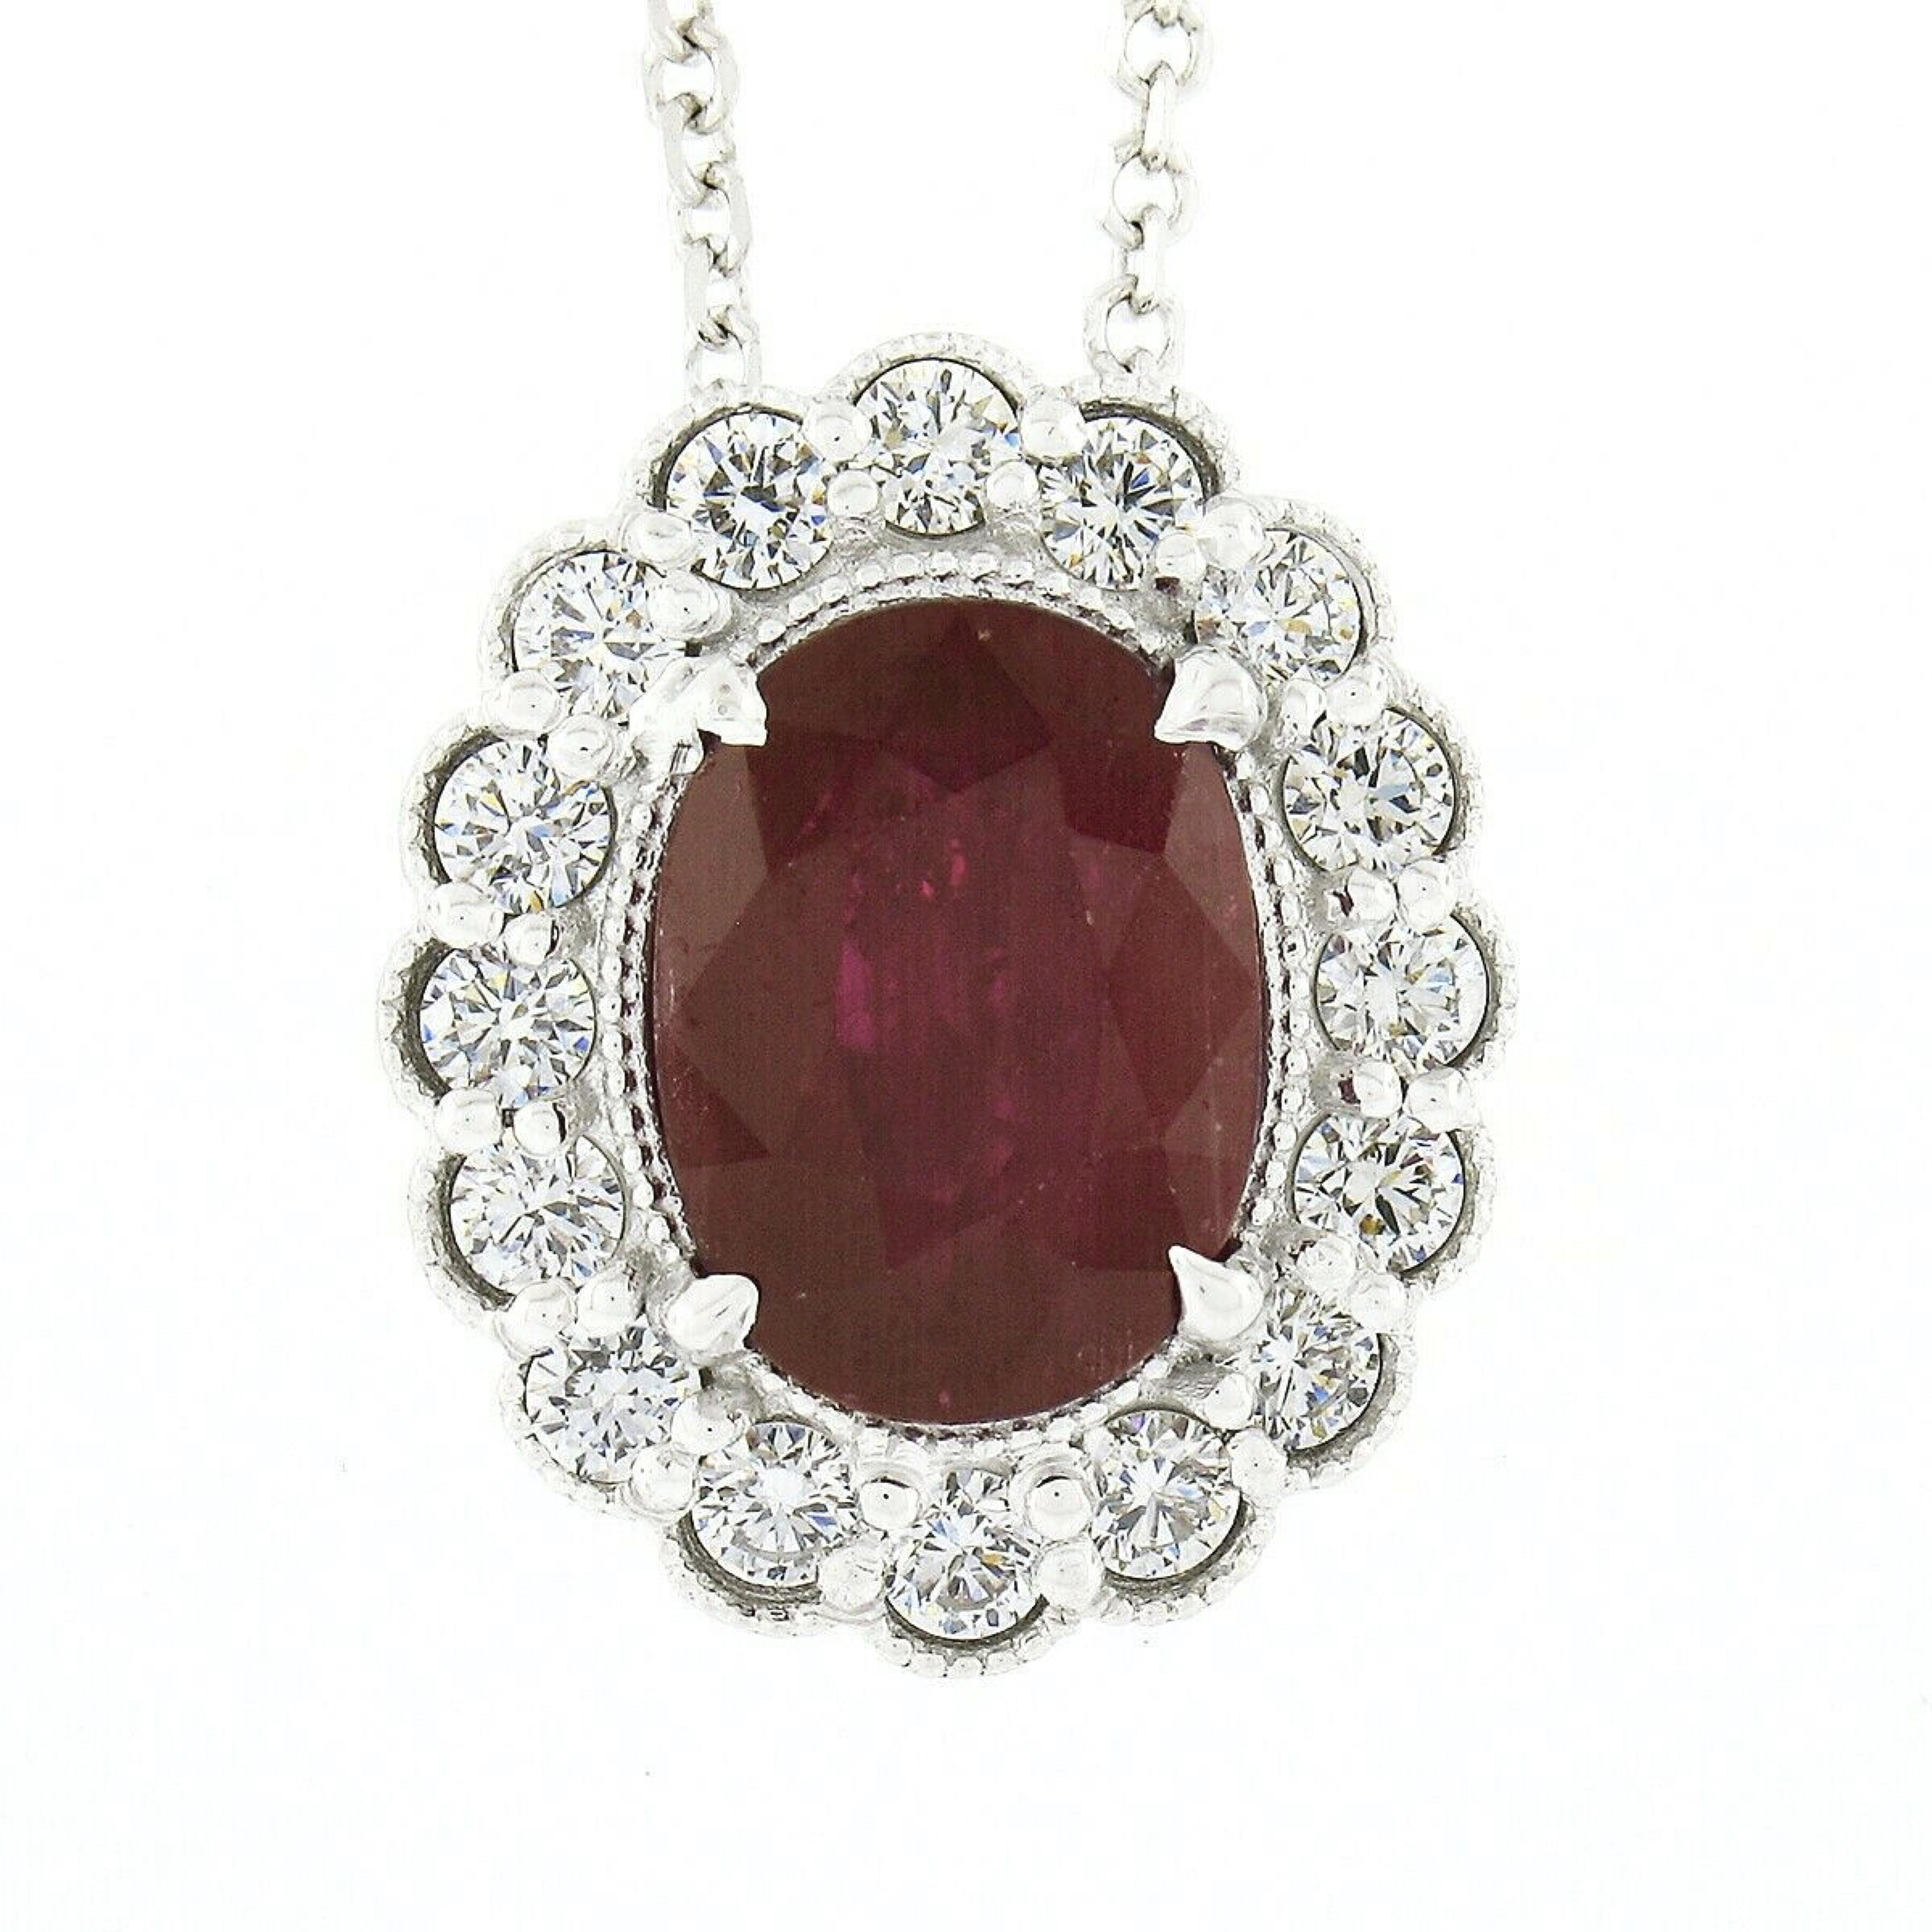 Here we have a gorgeous, brand new, and custom made pendant necklace crafted in solid 14k white gold and features a very fine oval brilliant cut ruby solitaire neatly set at the center of a stunning diamond halo. The ruby is certified as weighing